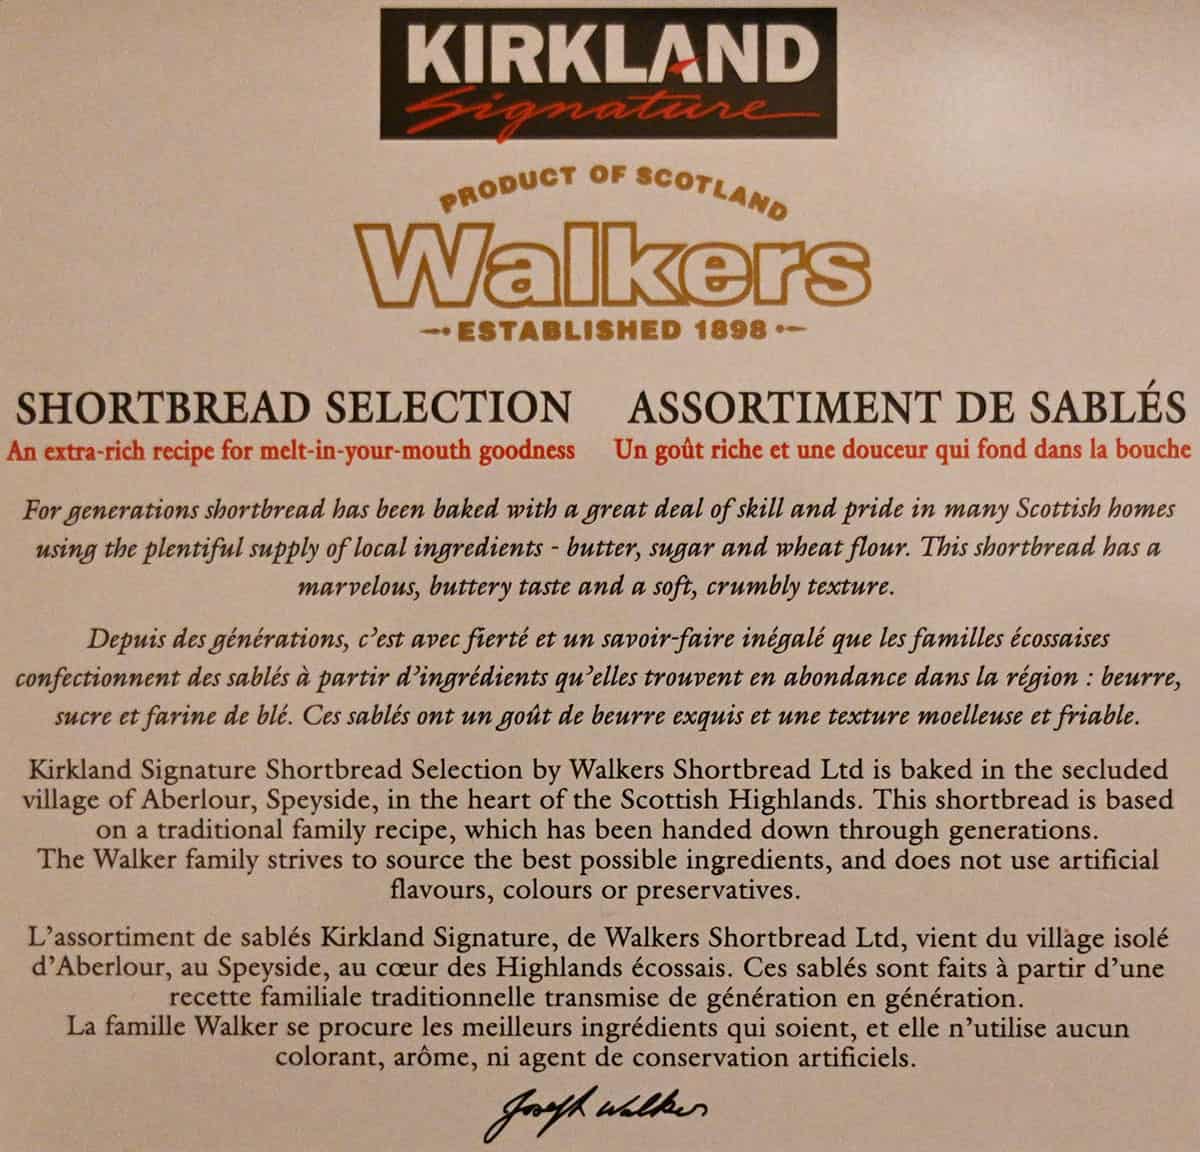 Image of the Walkers company and product description from the back of the tin.